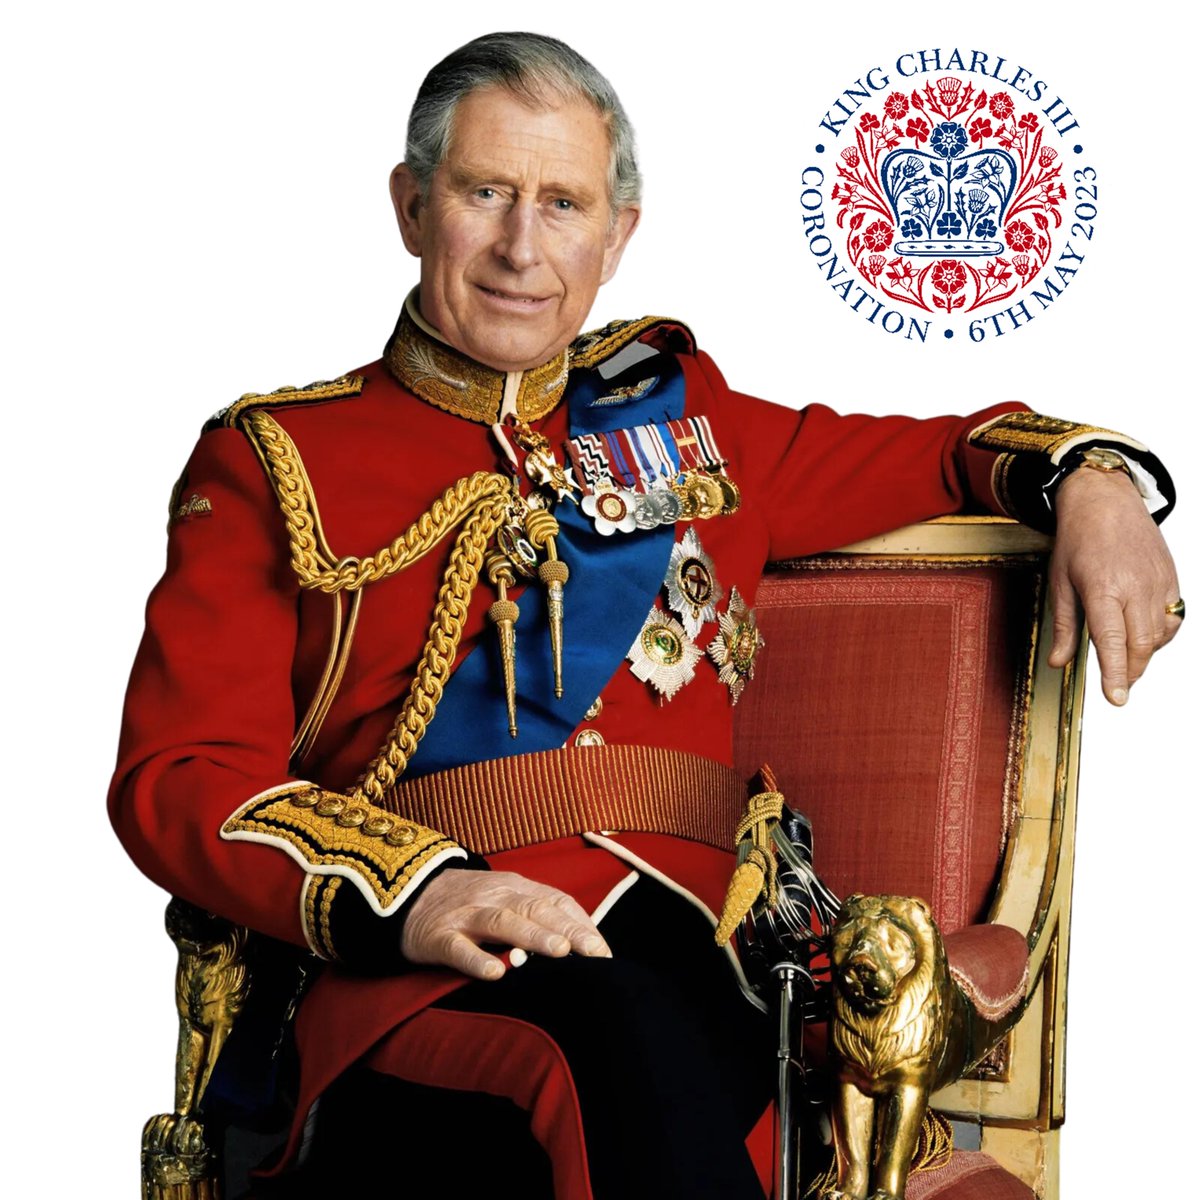 We hope everyone has a fantastic day celebrating King Charles III's coronation. 👑

Our offices will re-open on Tuesday 9th of May. Throughout the weekend, our call-out service can be contacted on 01494 474787.

#coronation #firesafety #fireprotection #firedoors #firealarms